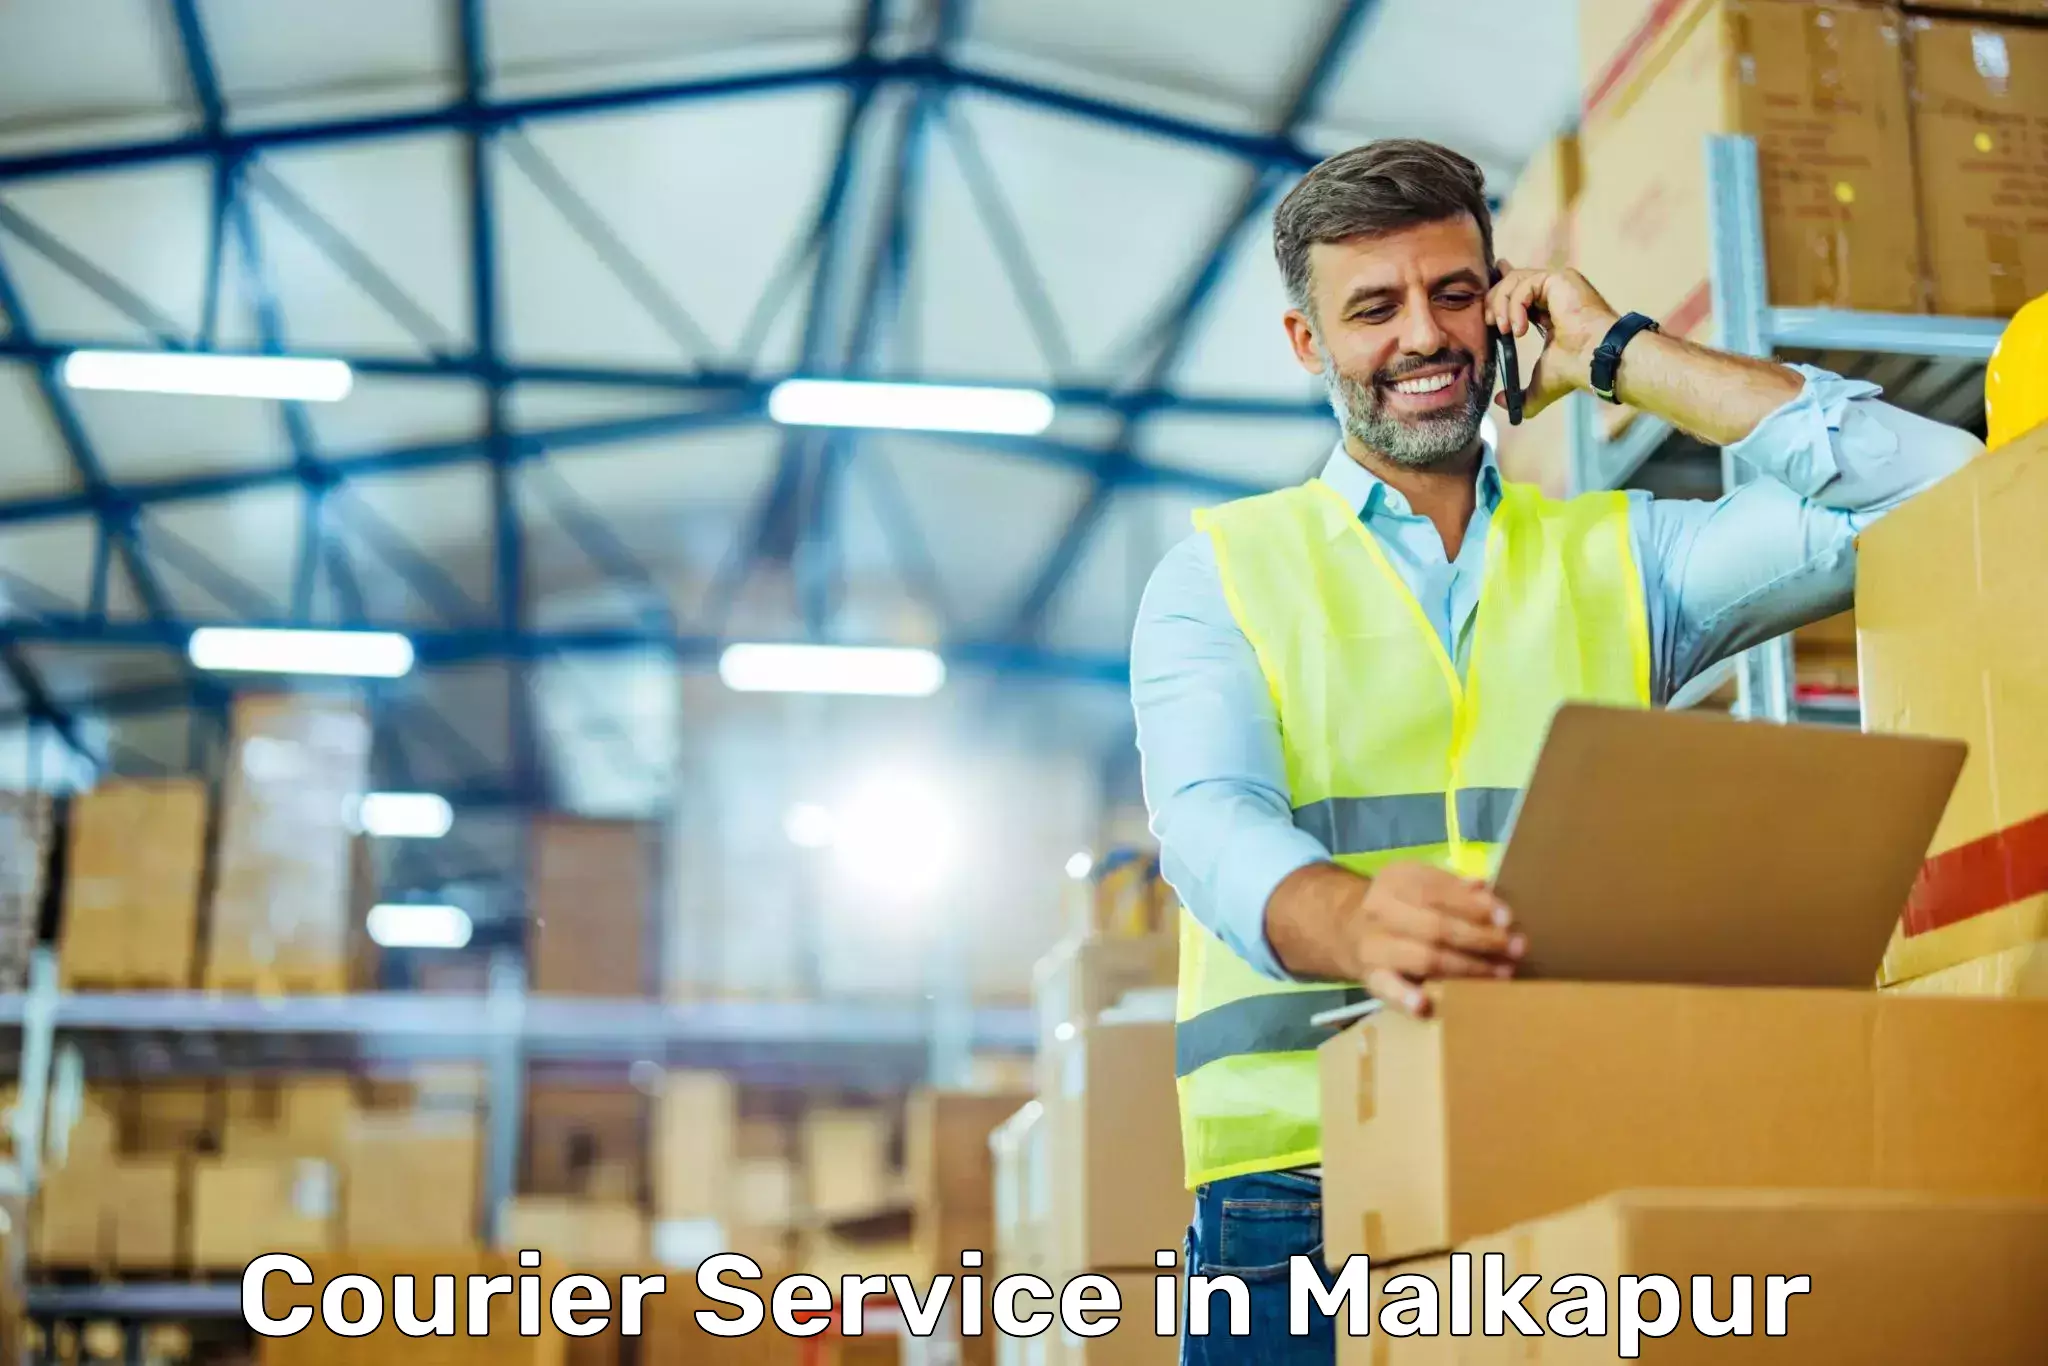 Supply chain delivery in Malkapur